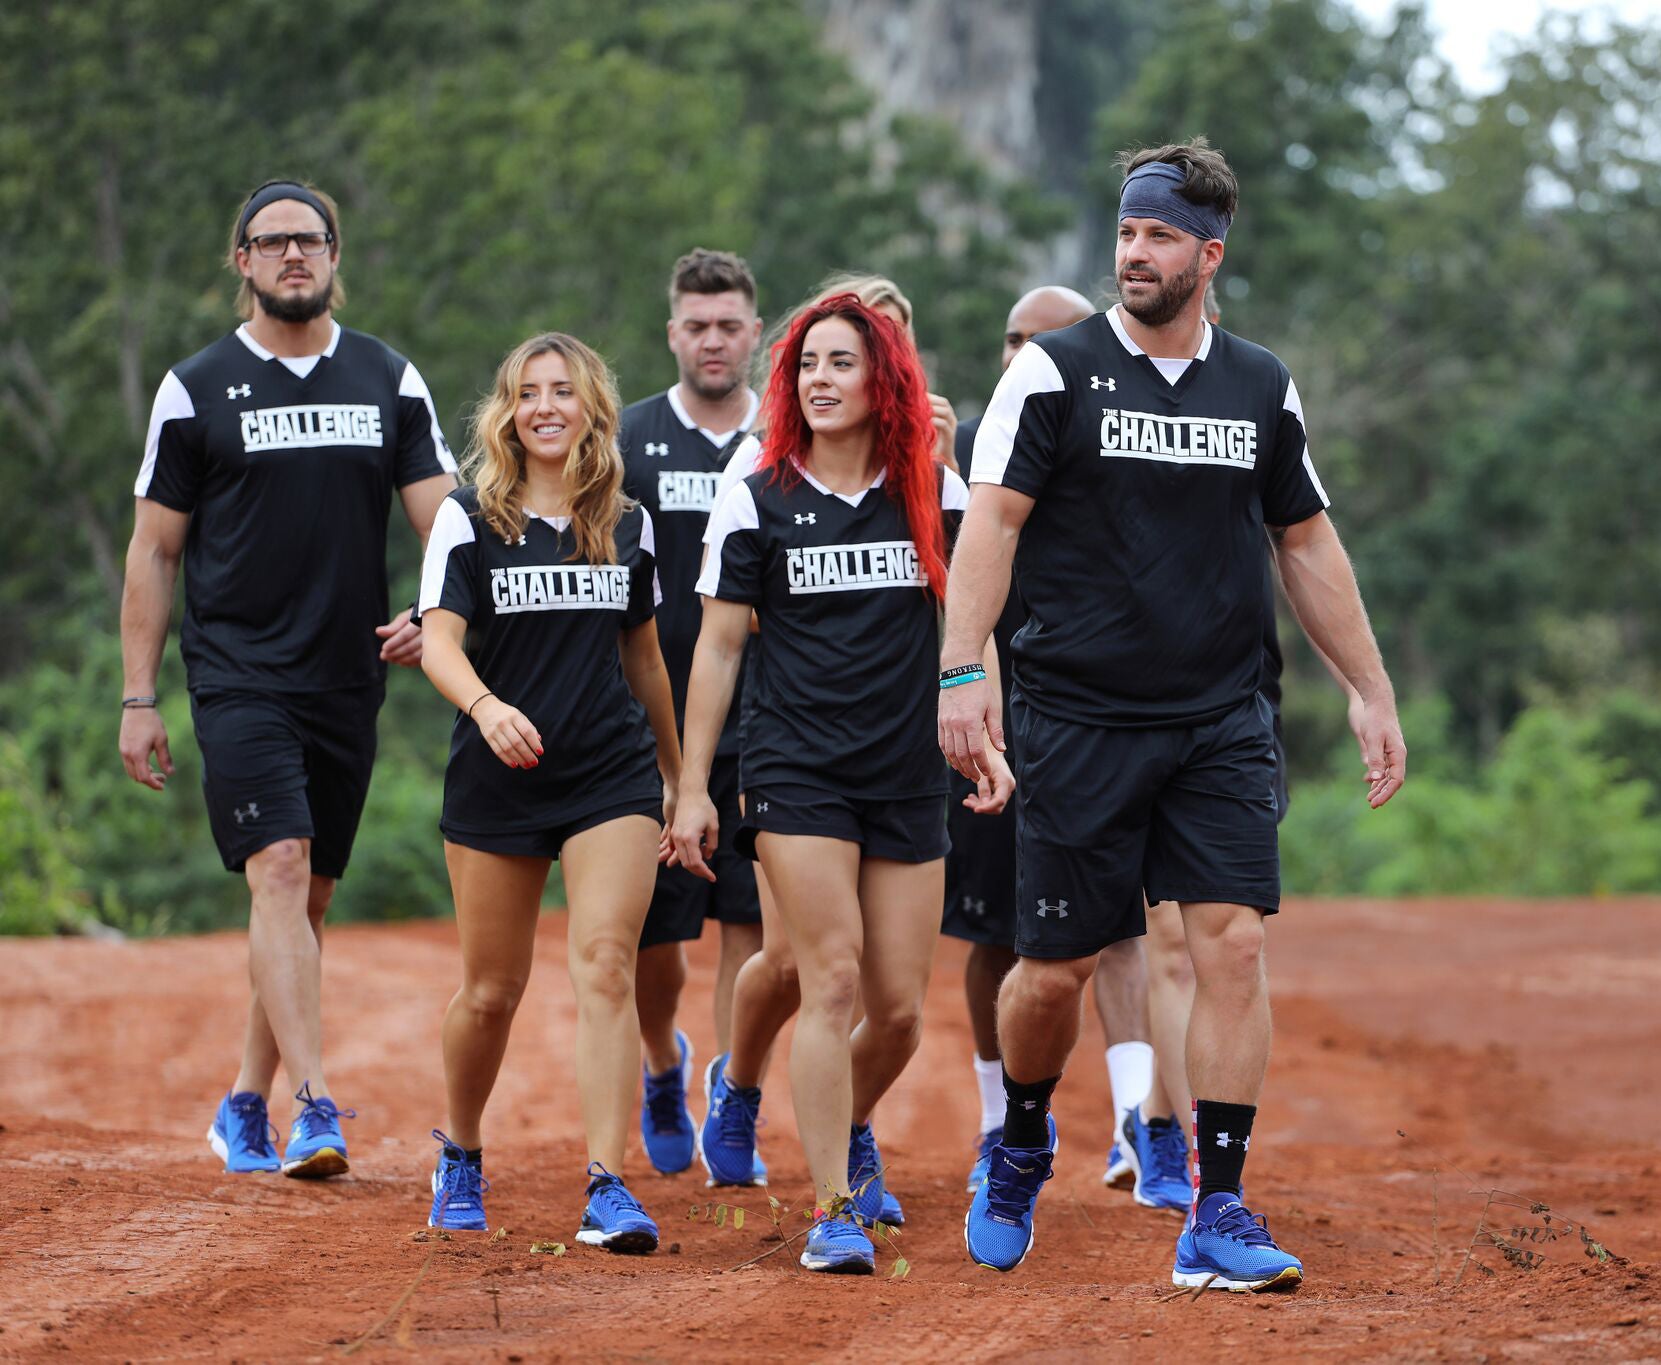 Five people in matching sports kits walk on a dirt path